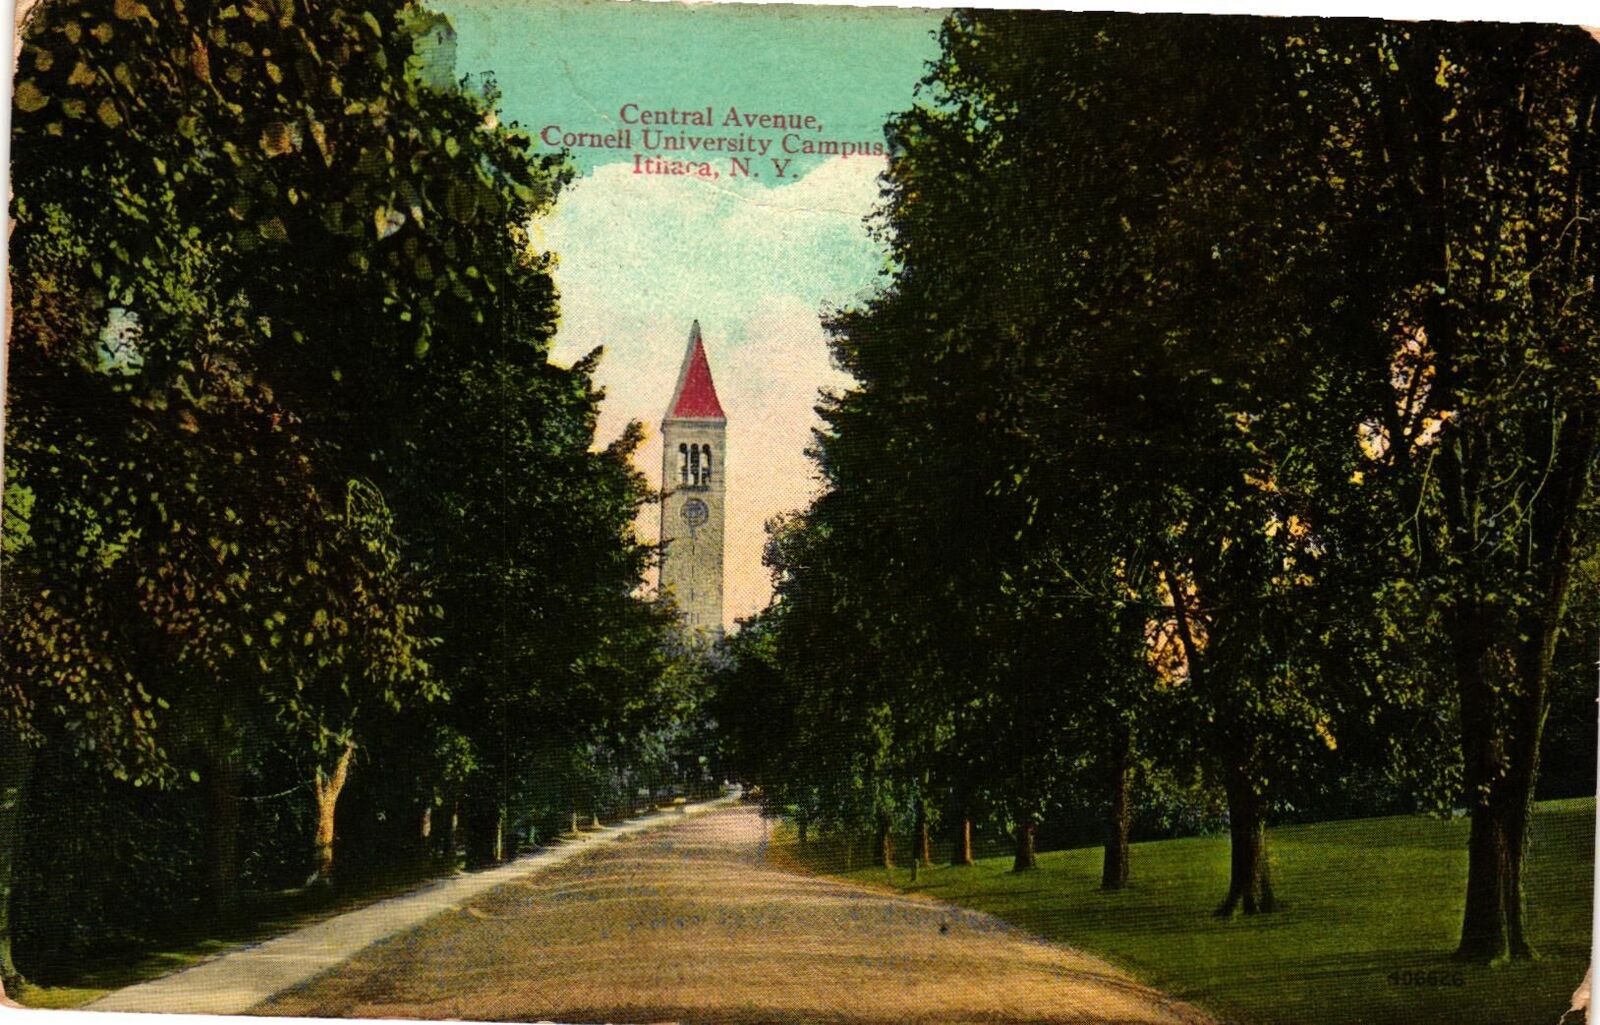 Vintage Postcard- Central Avenue, Cornell University Campus, Ithaca, Early 1900s